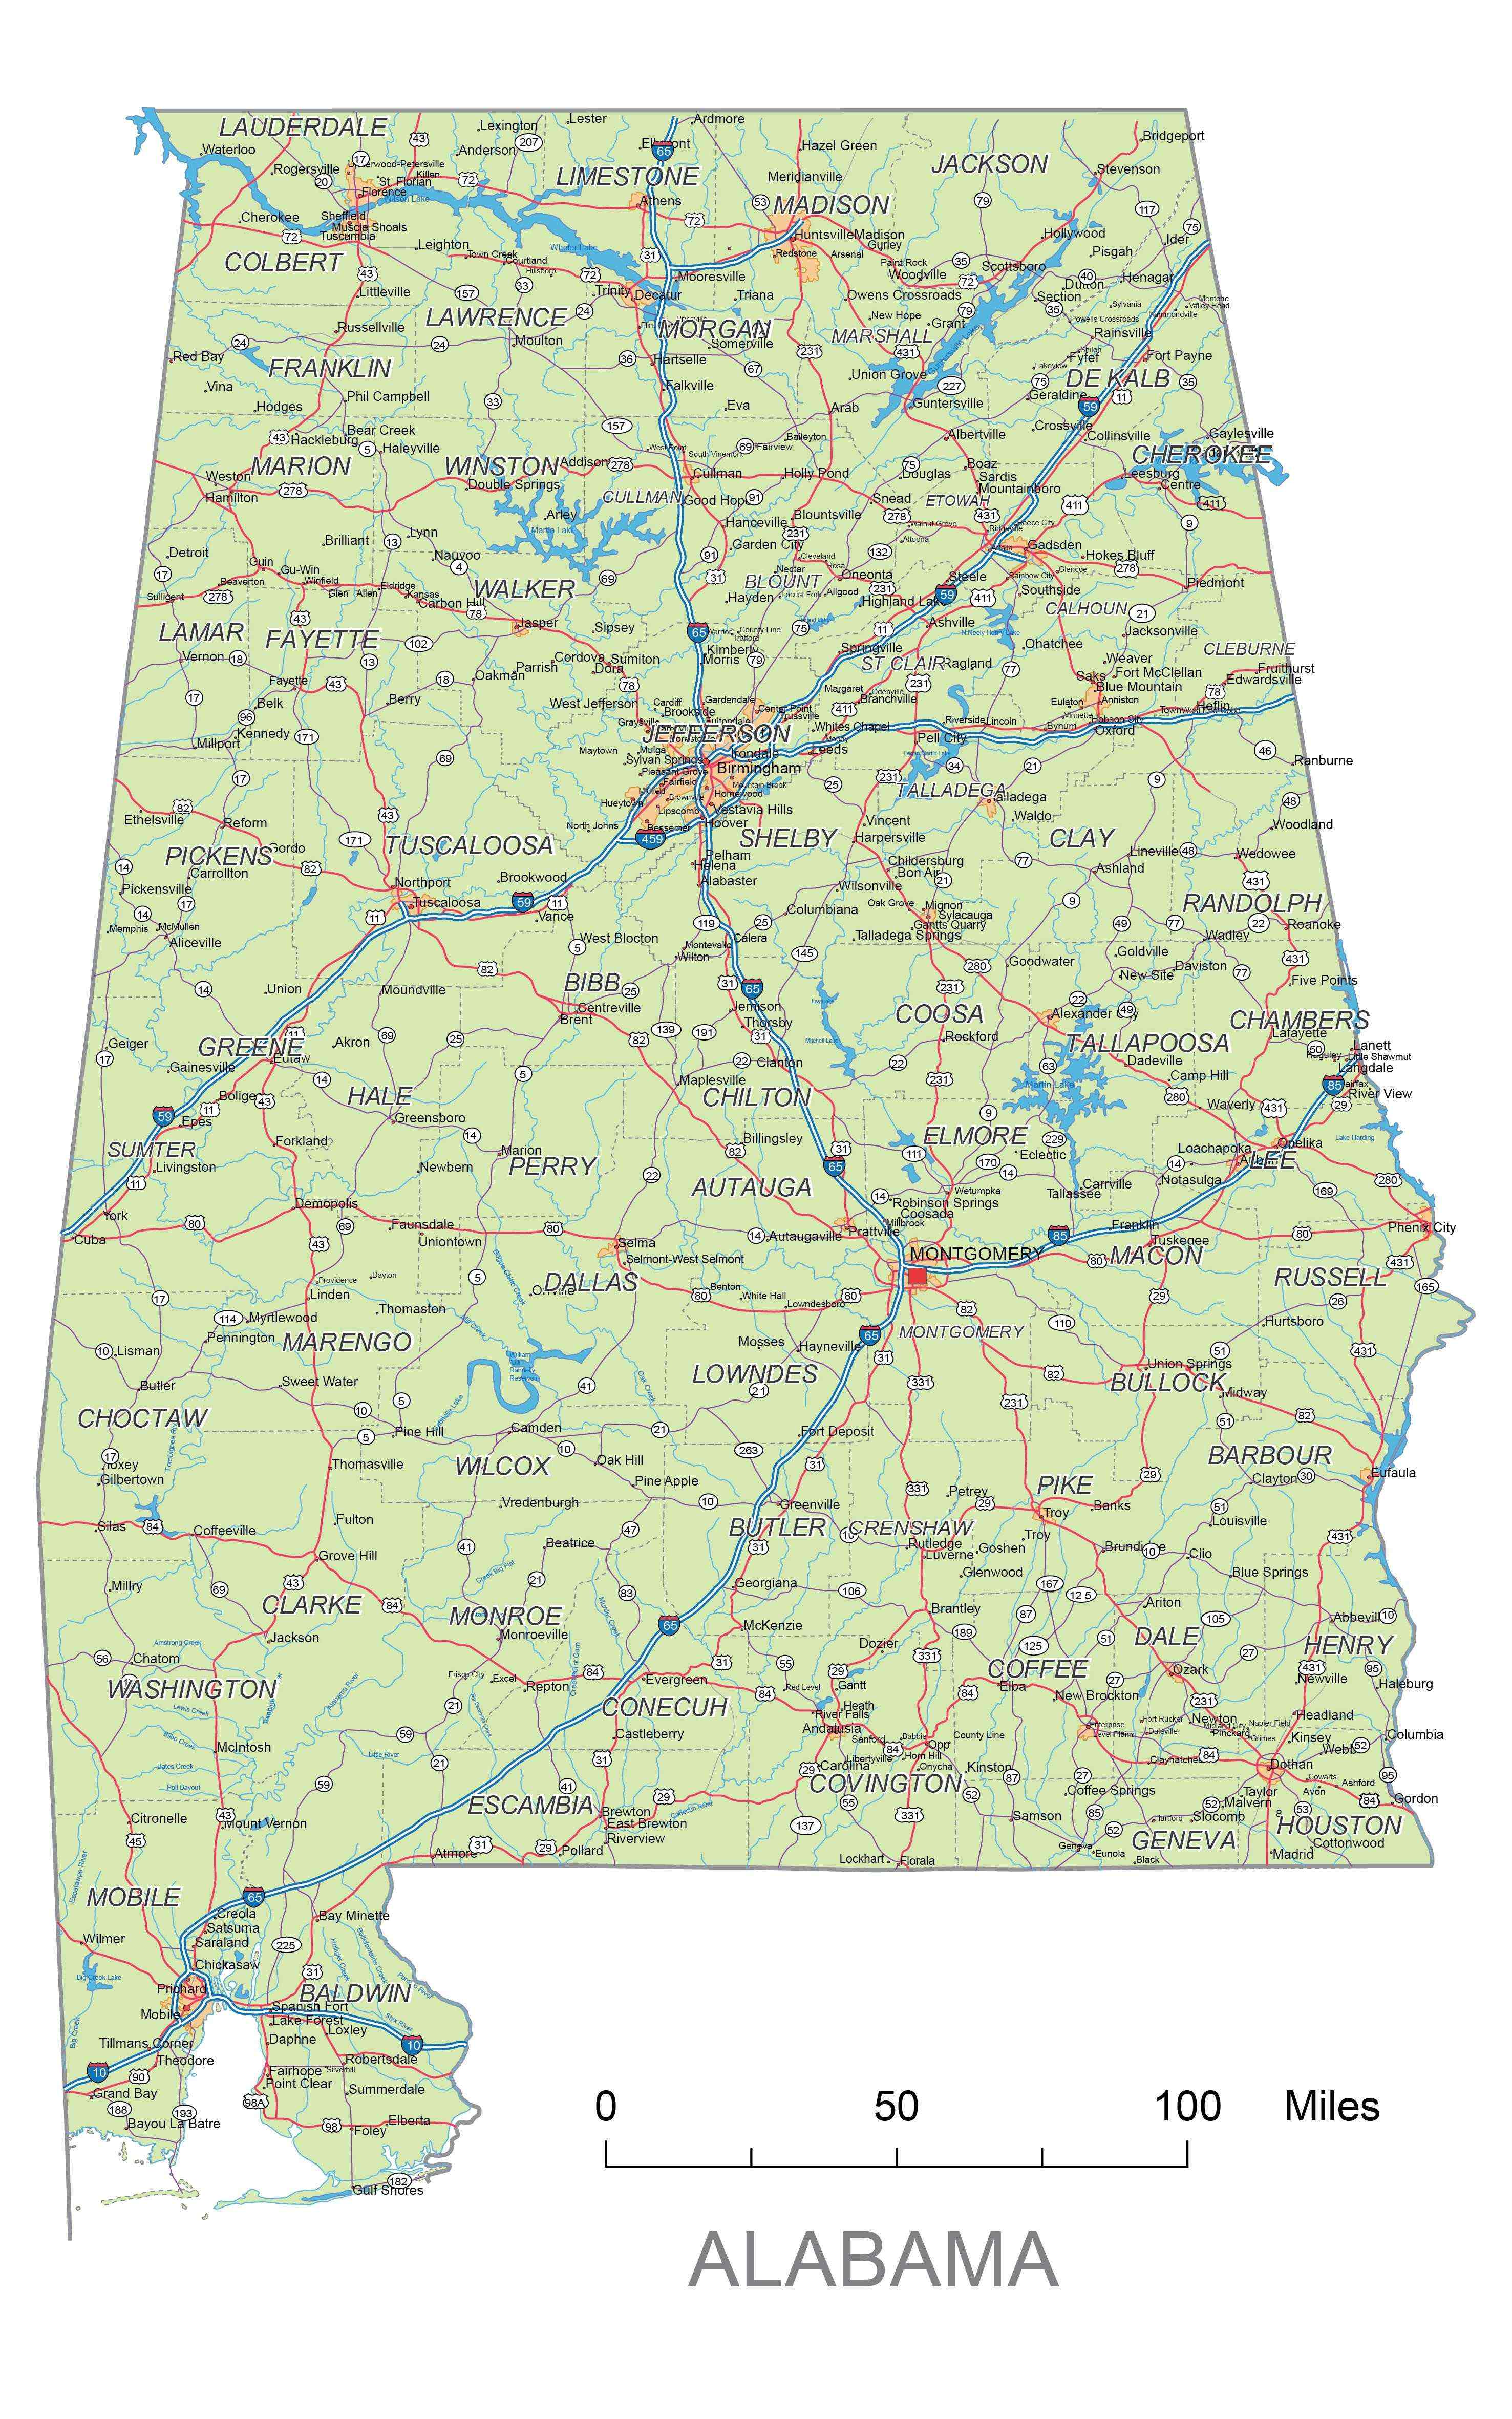 Preview of Alabama State Cities Alabama Road Vector Map lossless